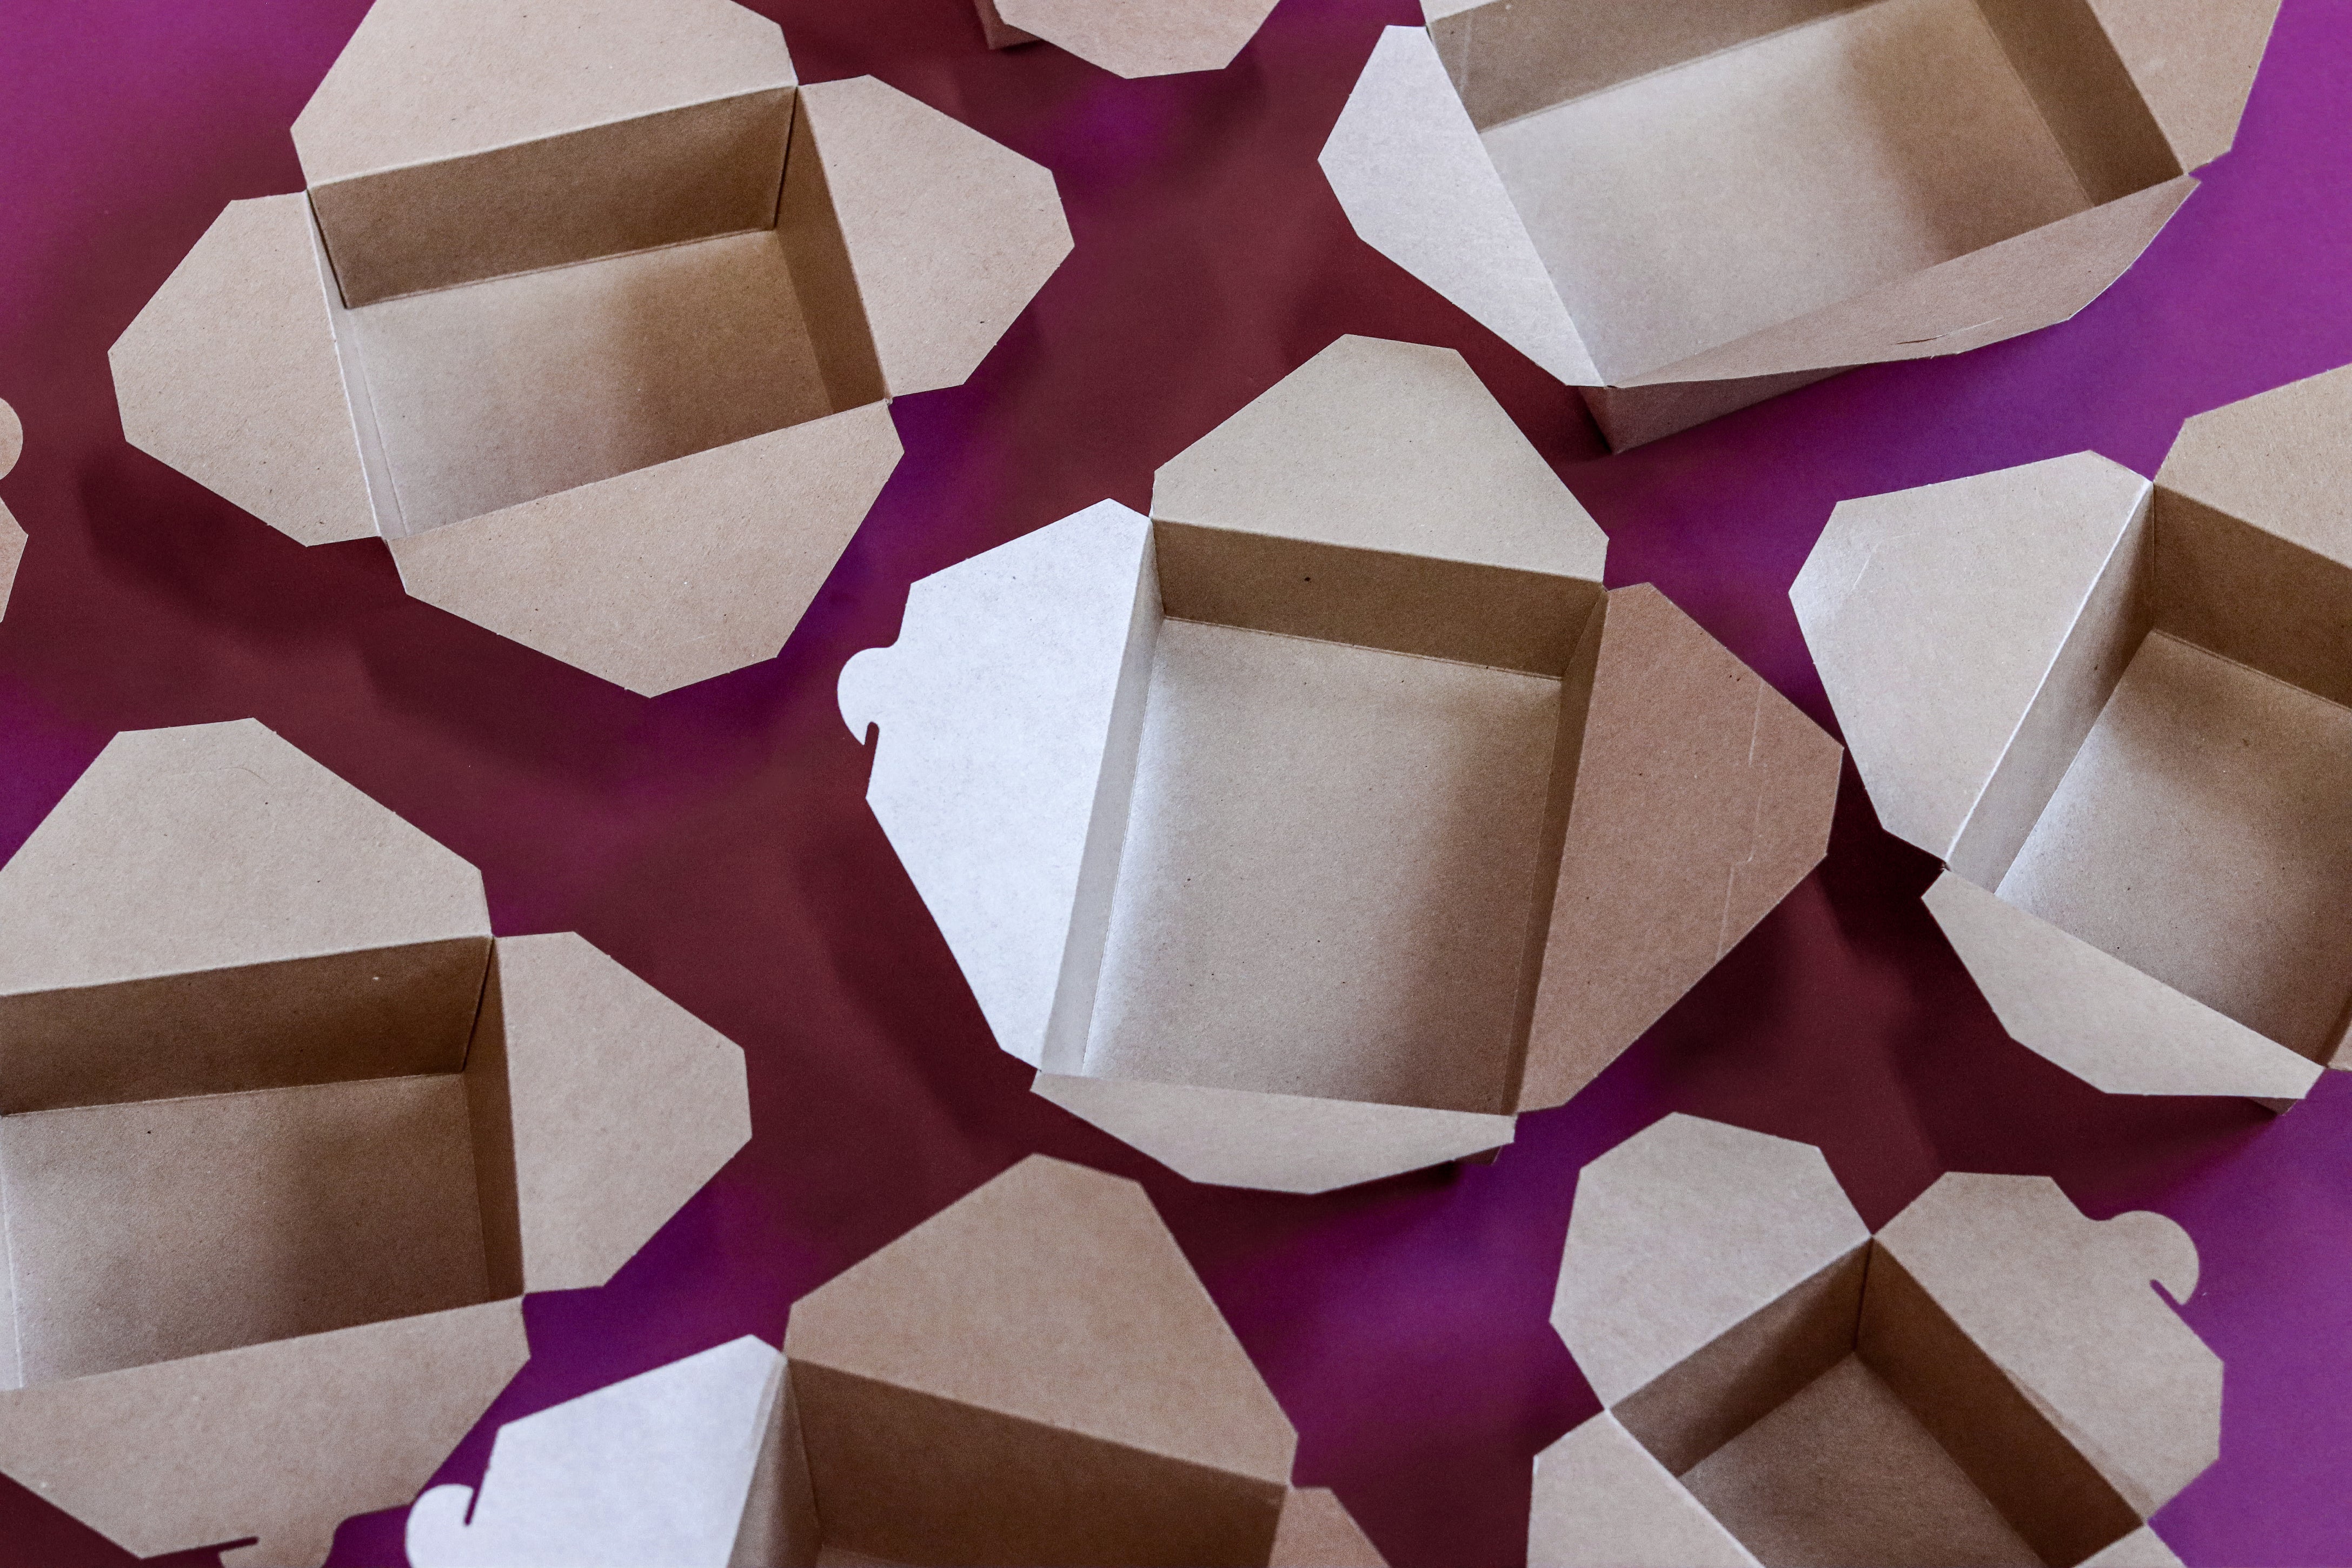 The image features several open, empty Kraft takeaway boxes on a purple background, highlighting a theme of sustainable packaging.